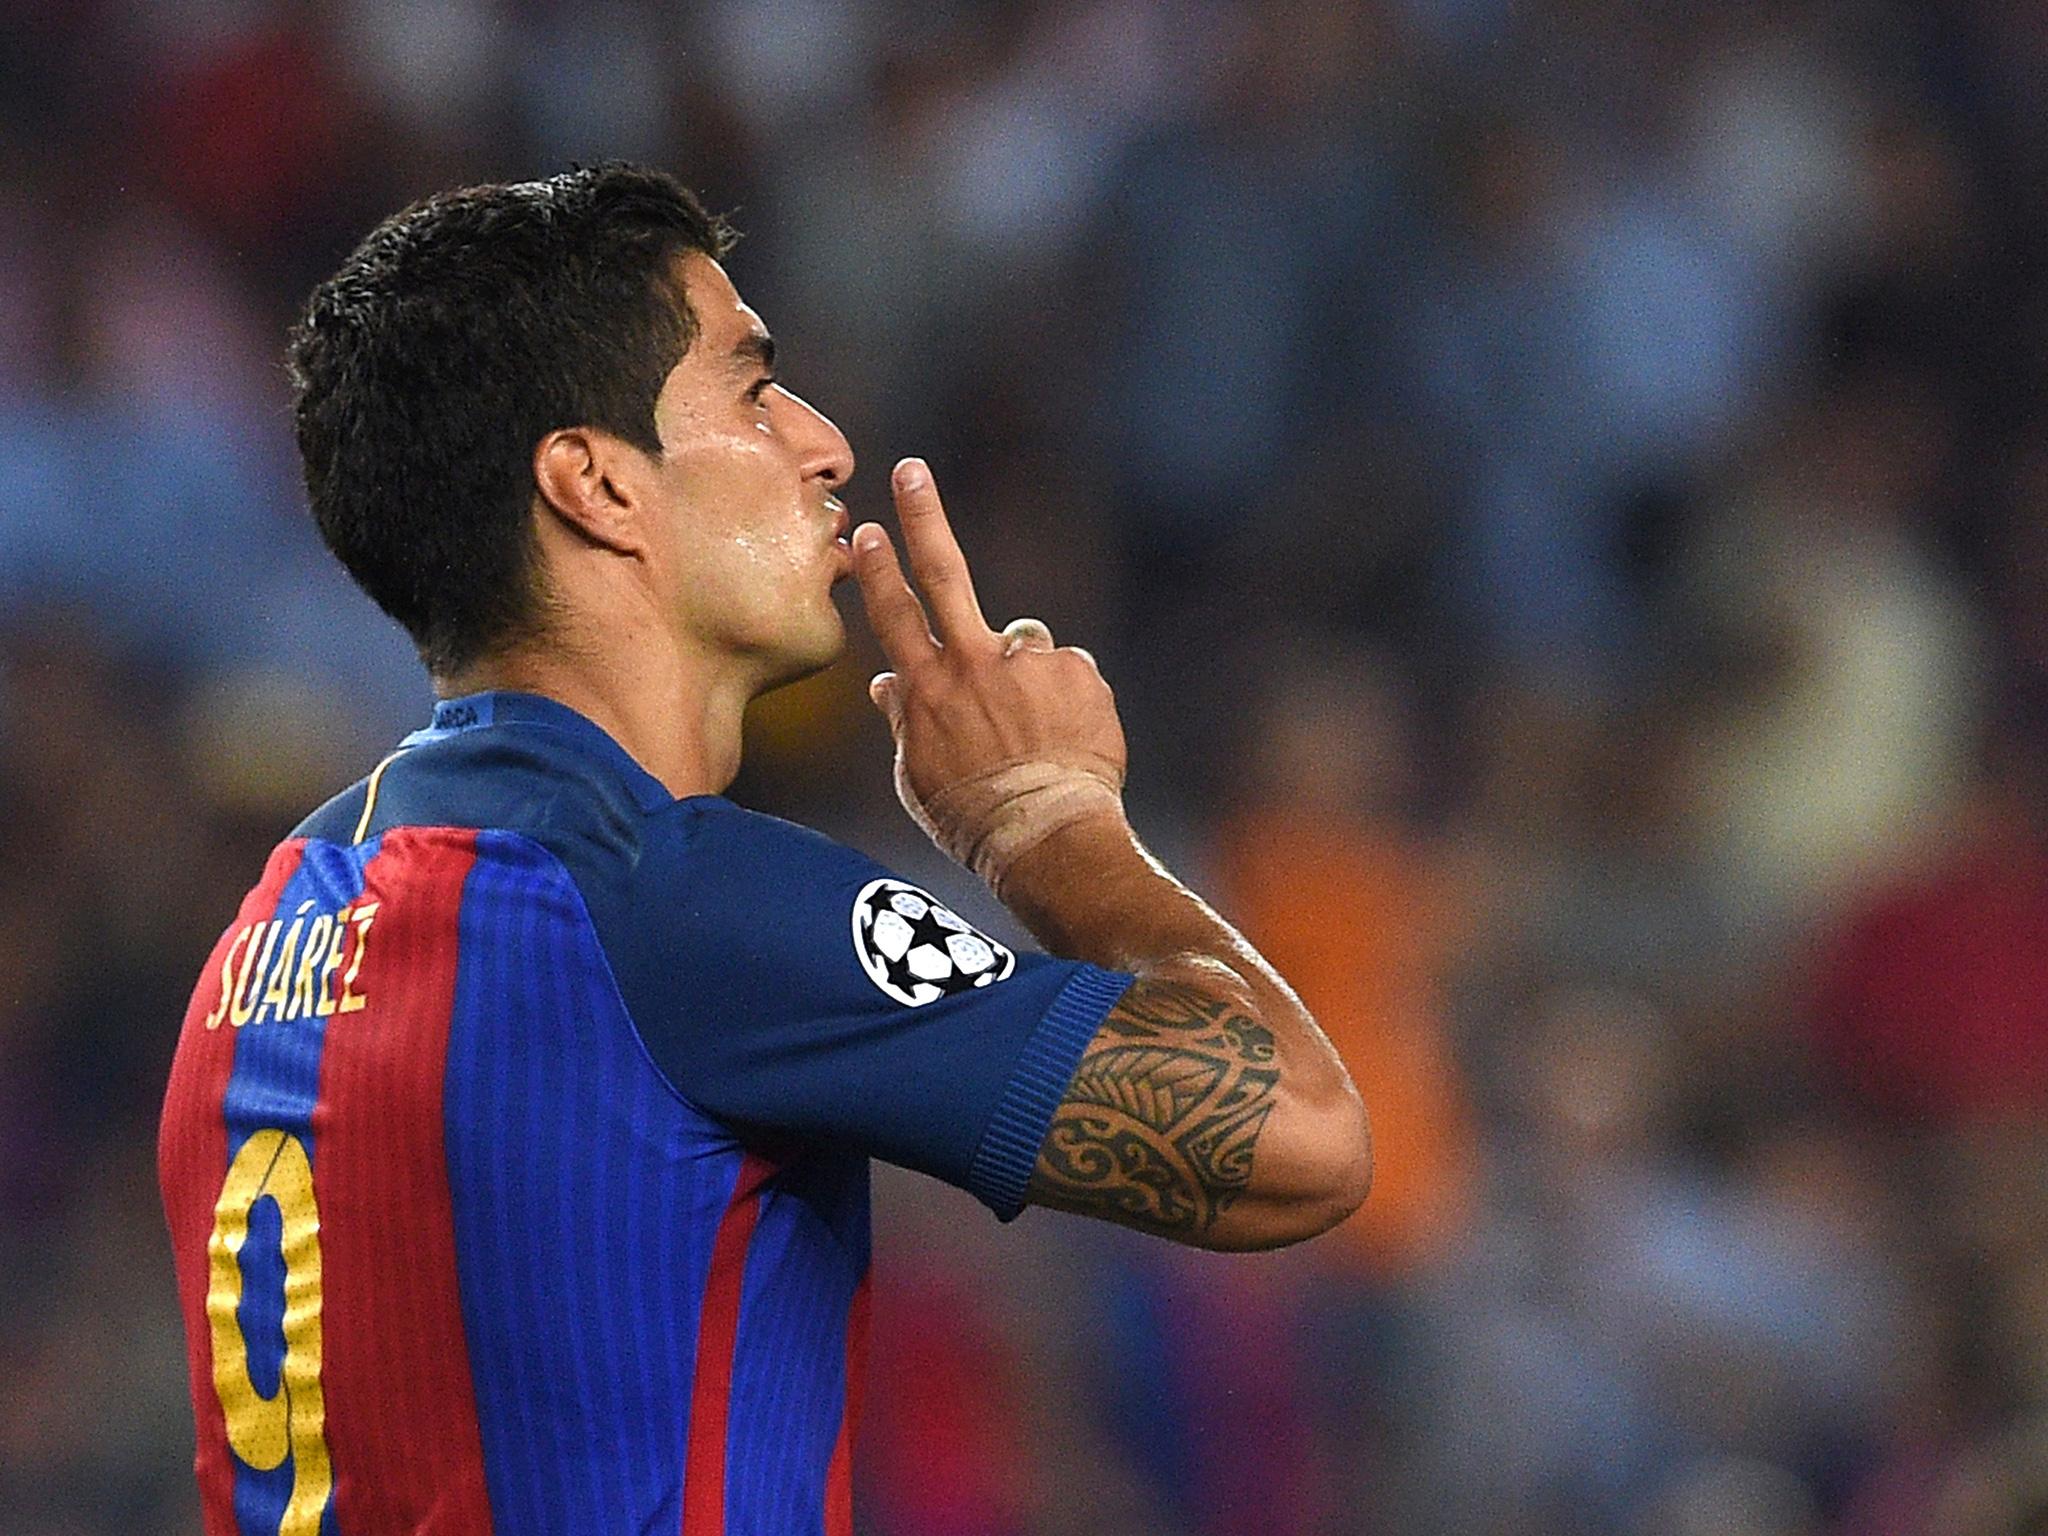 Suarez grabbed a brace over his former manager's side